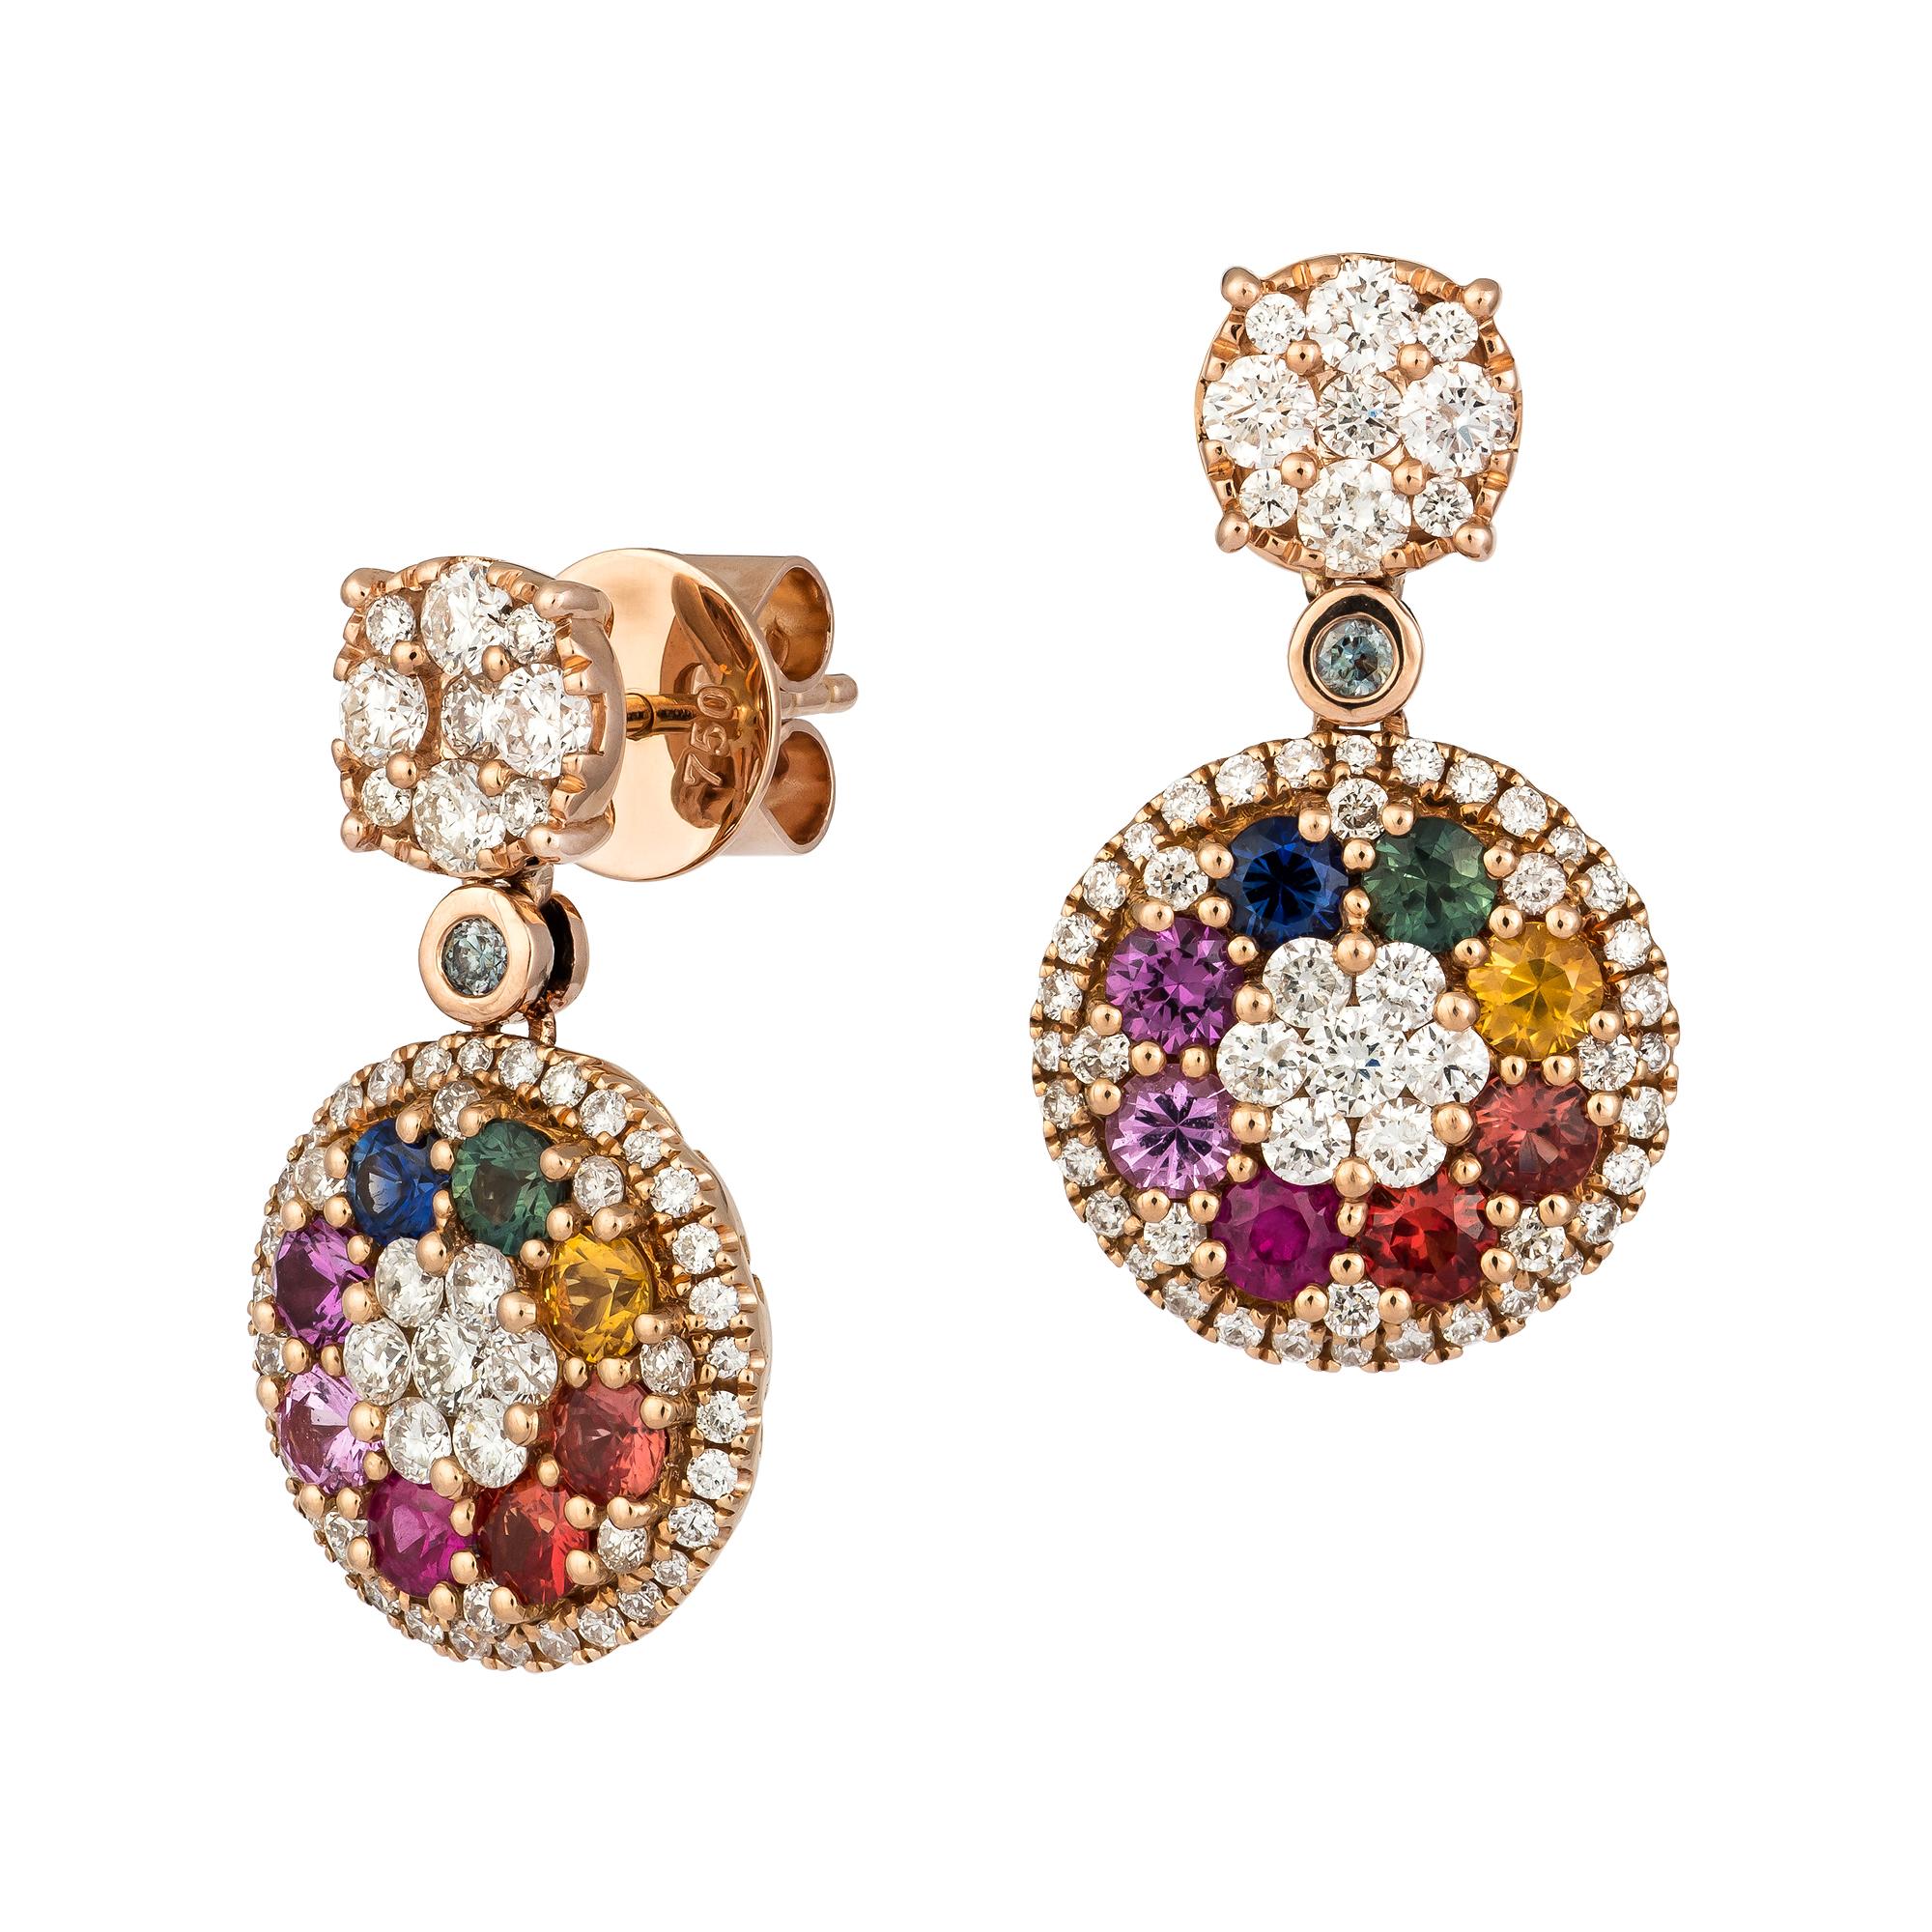 EARRING 18K Rose Gold D 1.50 Cts/114 Pieces, Multi Sapphire 1.77 Cts/16 Pieces
